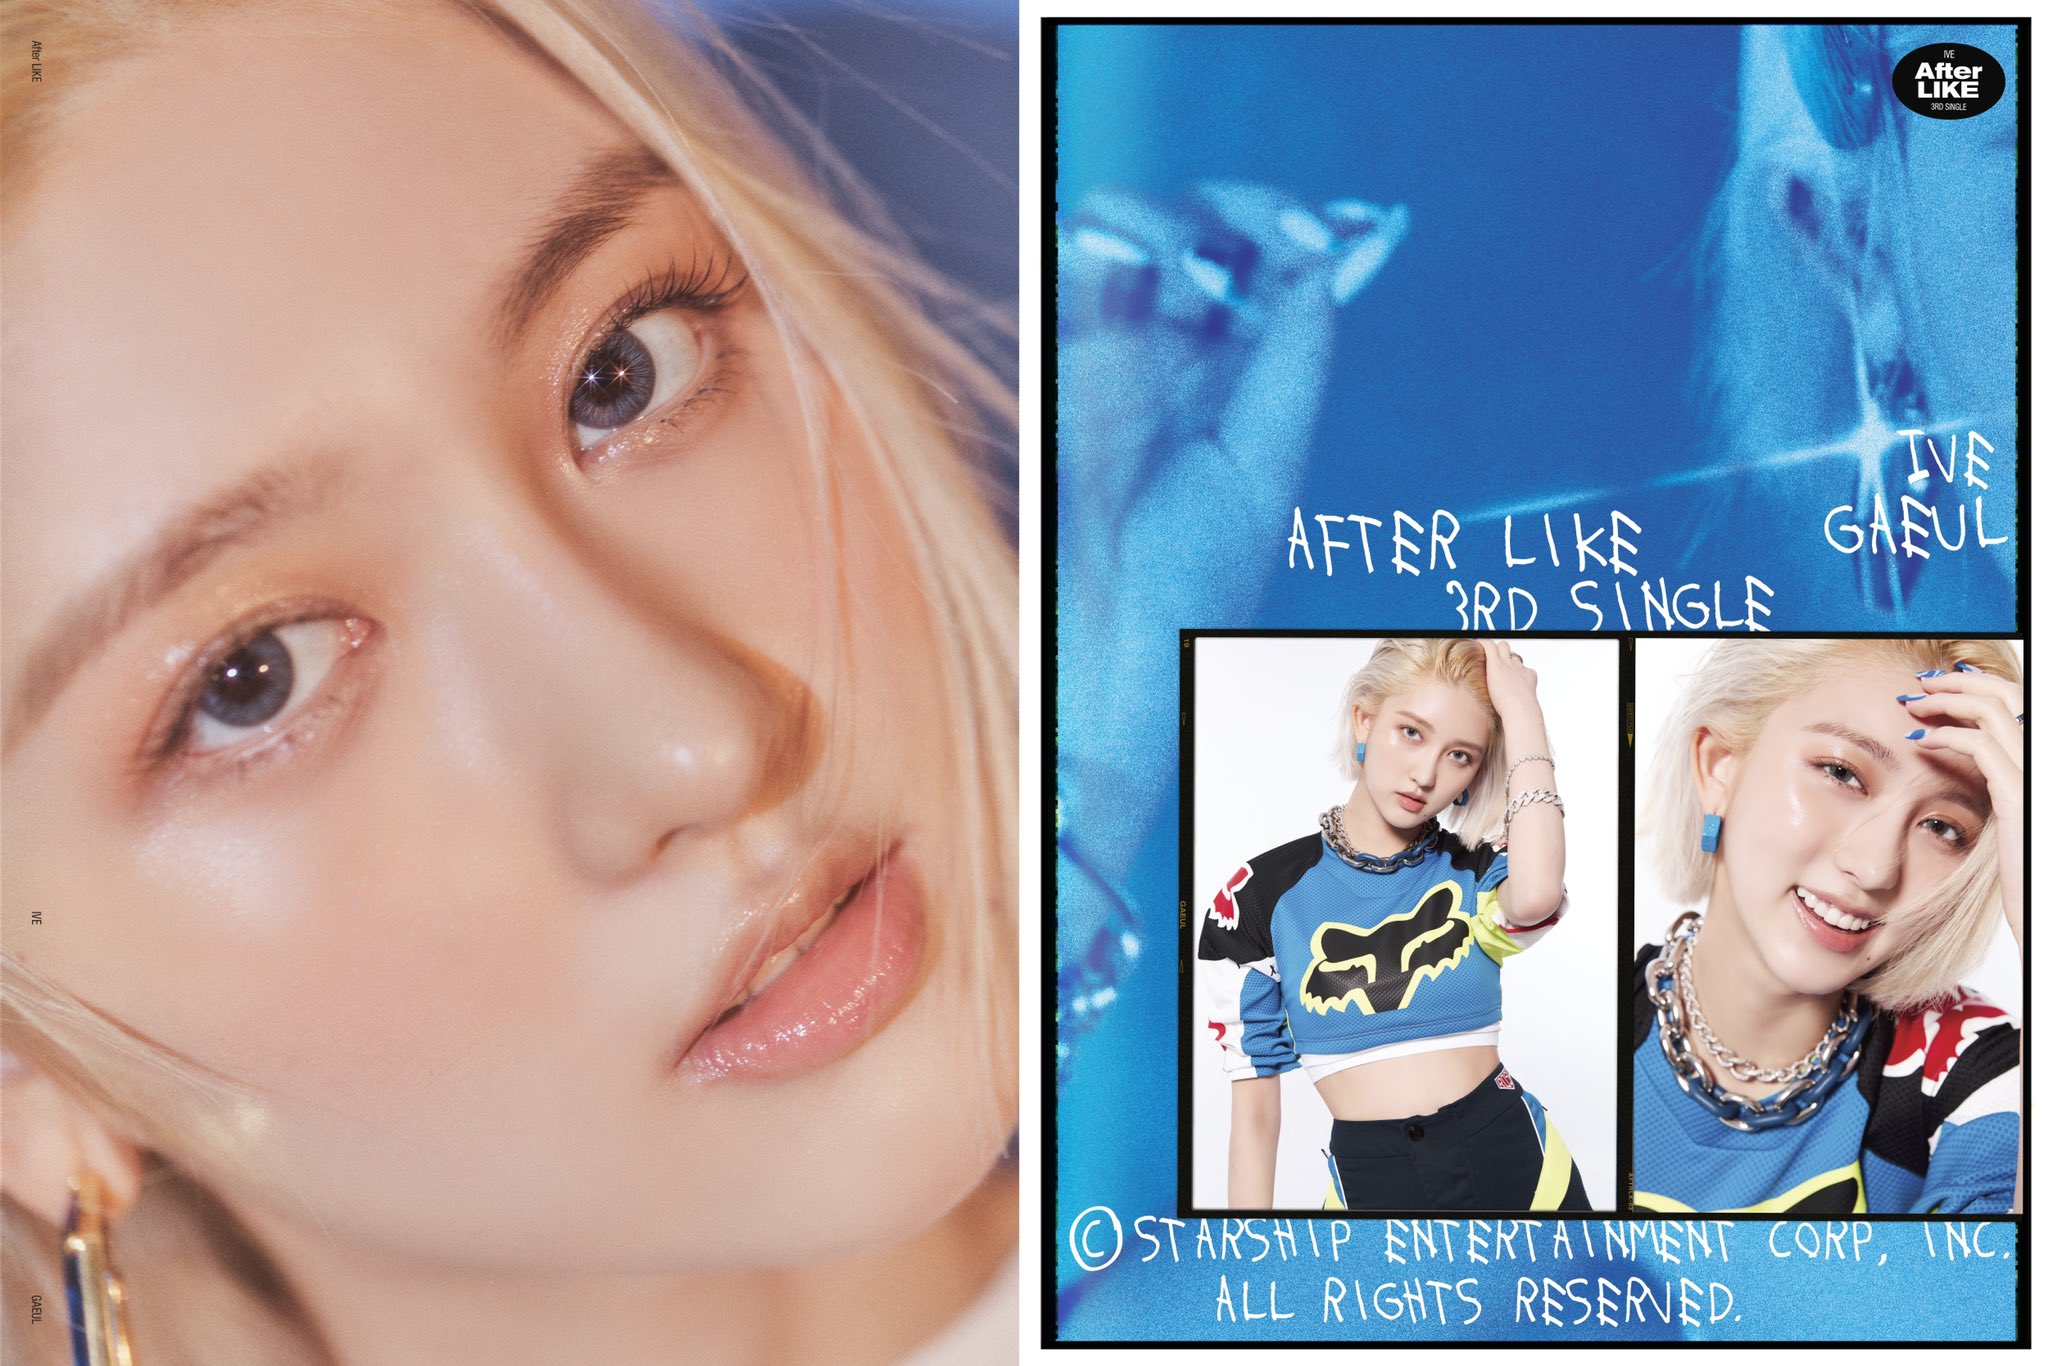 It s like after. After like обложка. Вонен after like. Live after like обложка альбома. Ive ive album.